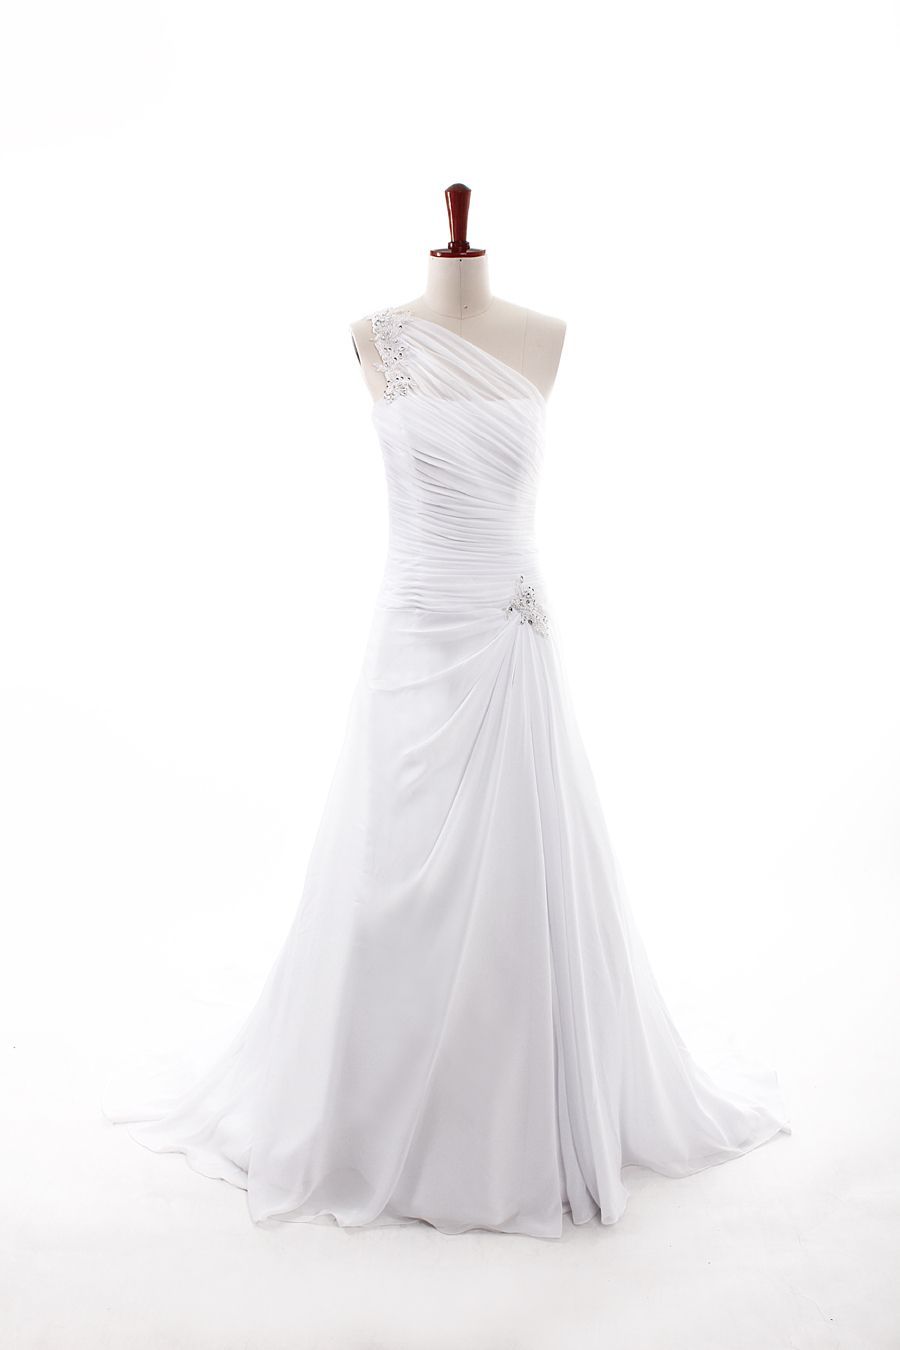 Fashionable One Shoulder Dropped waist Chiffon wedding dress….this is gorgeous